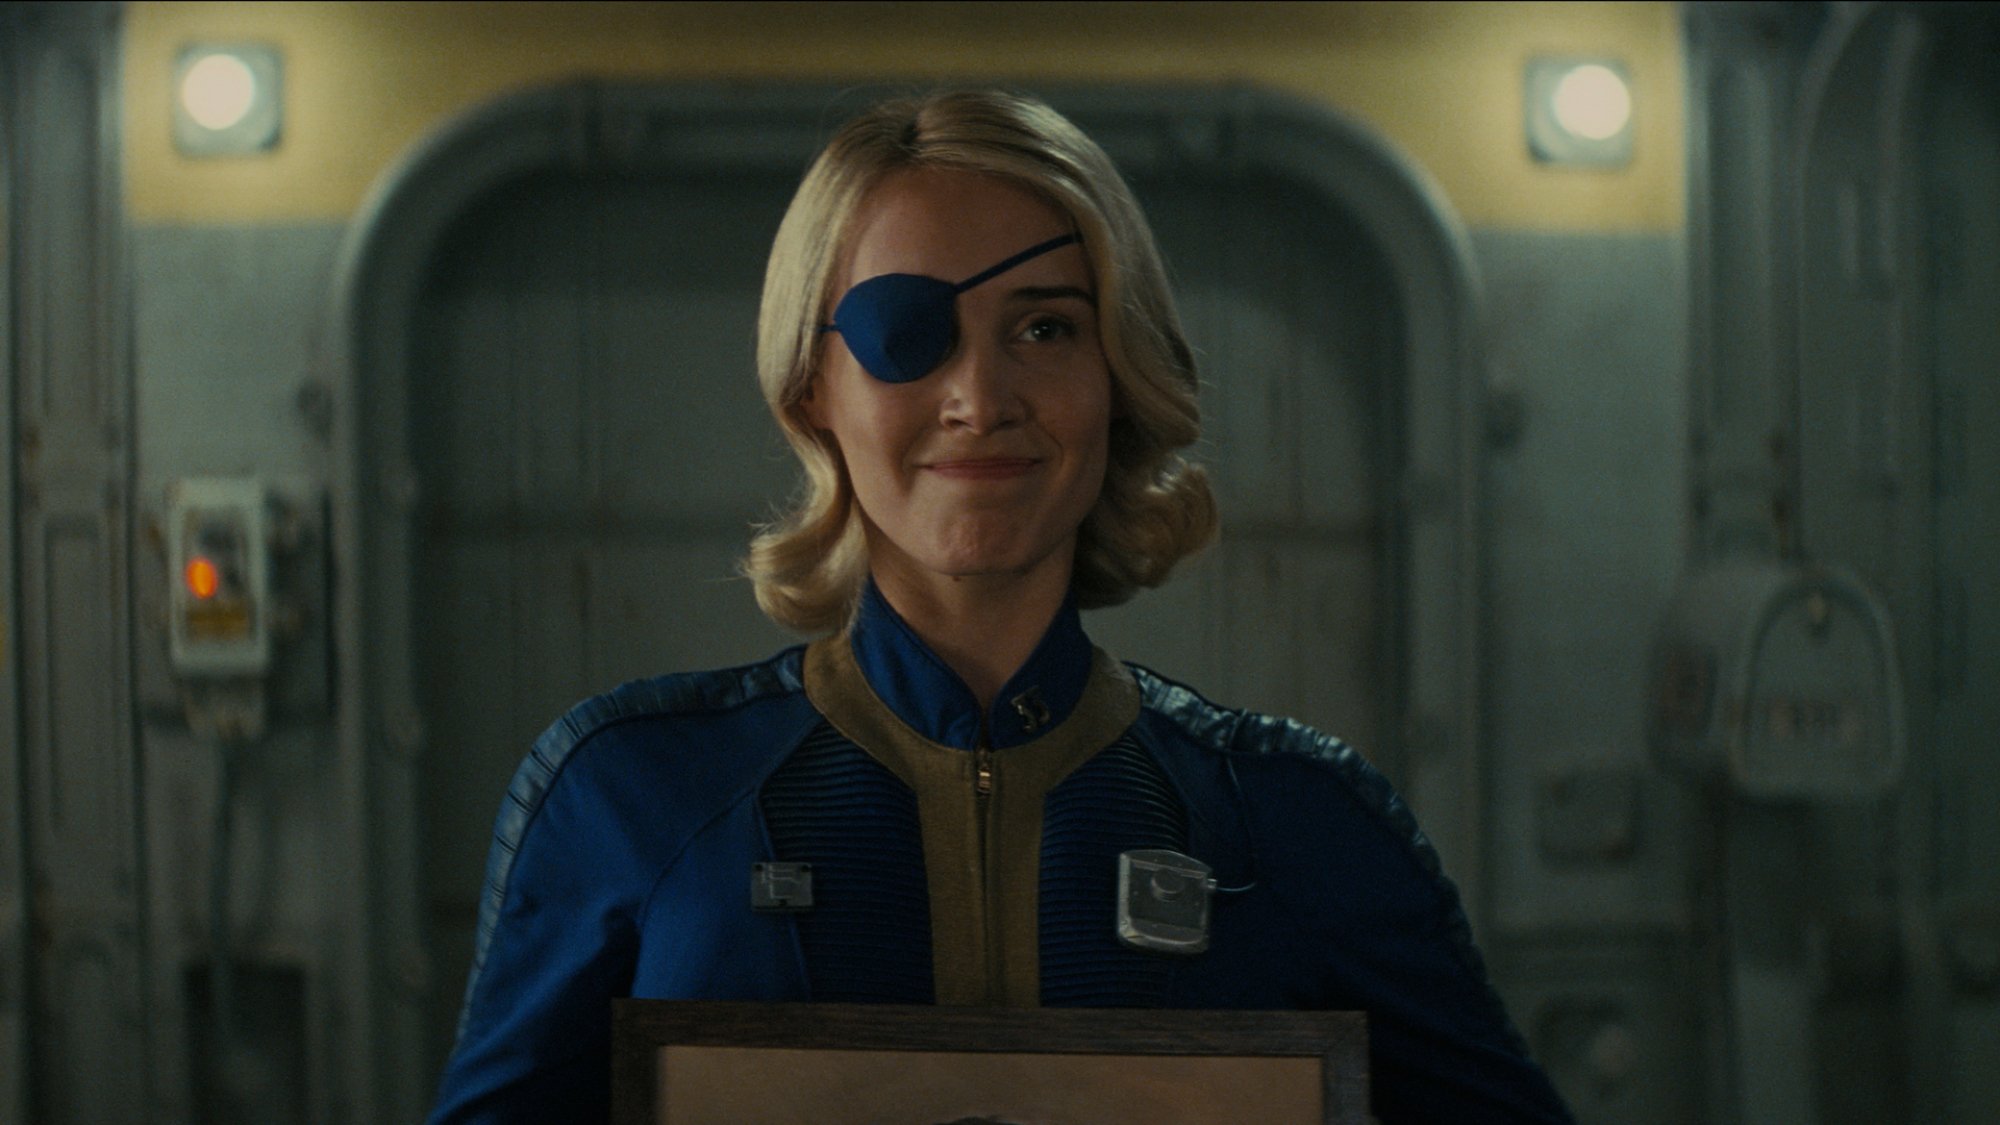 Annabel O’Hagan wears a blue jumpsuit and an eyepatch as Stephanie Harper in "Fallout."